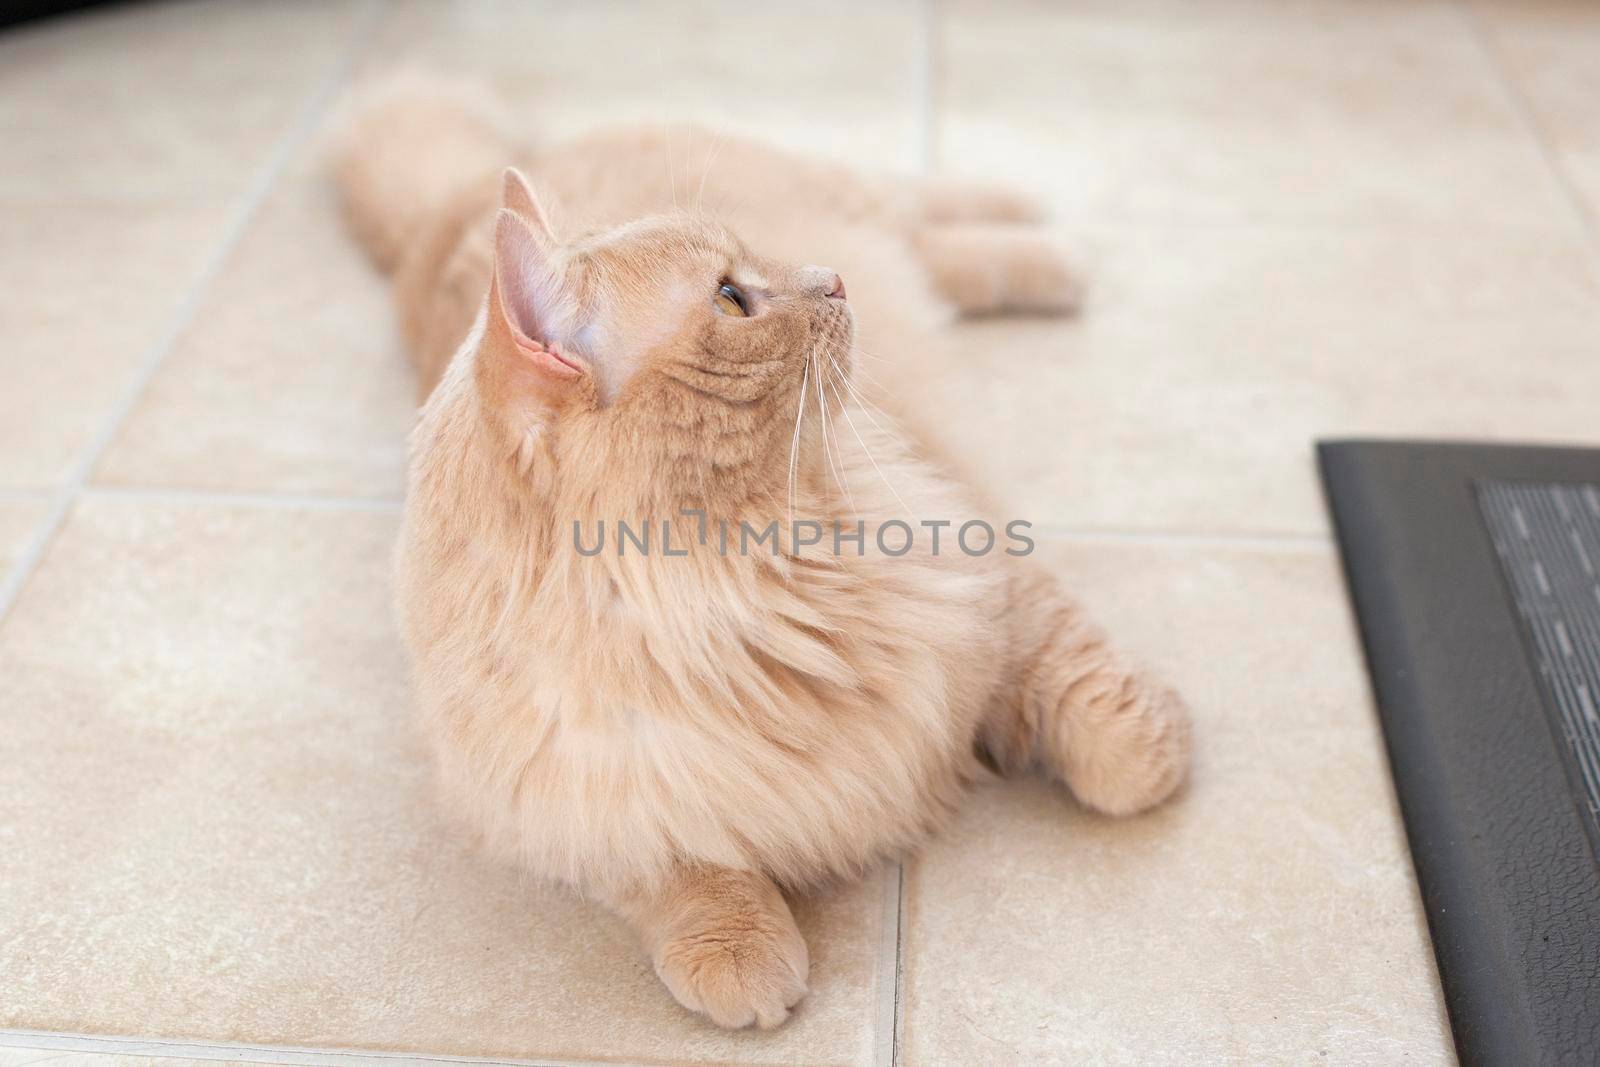 Orange cat lays on its side, posing and relaxing on a tile floor 